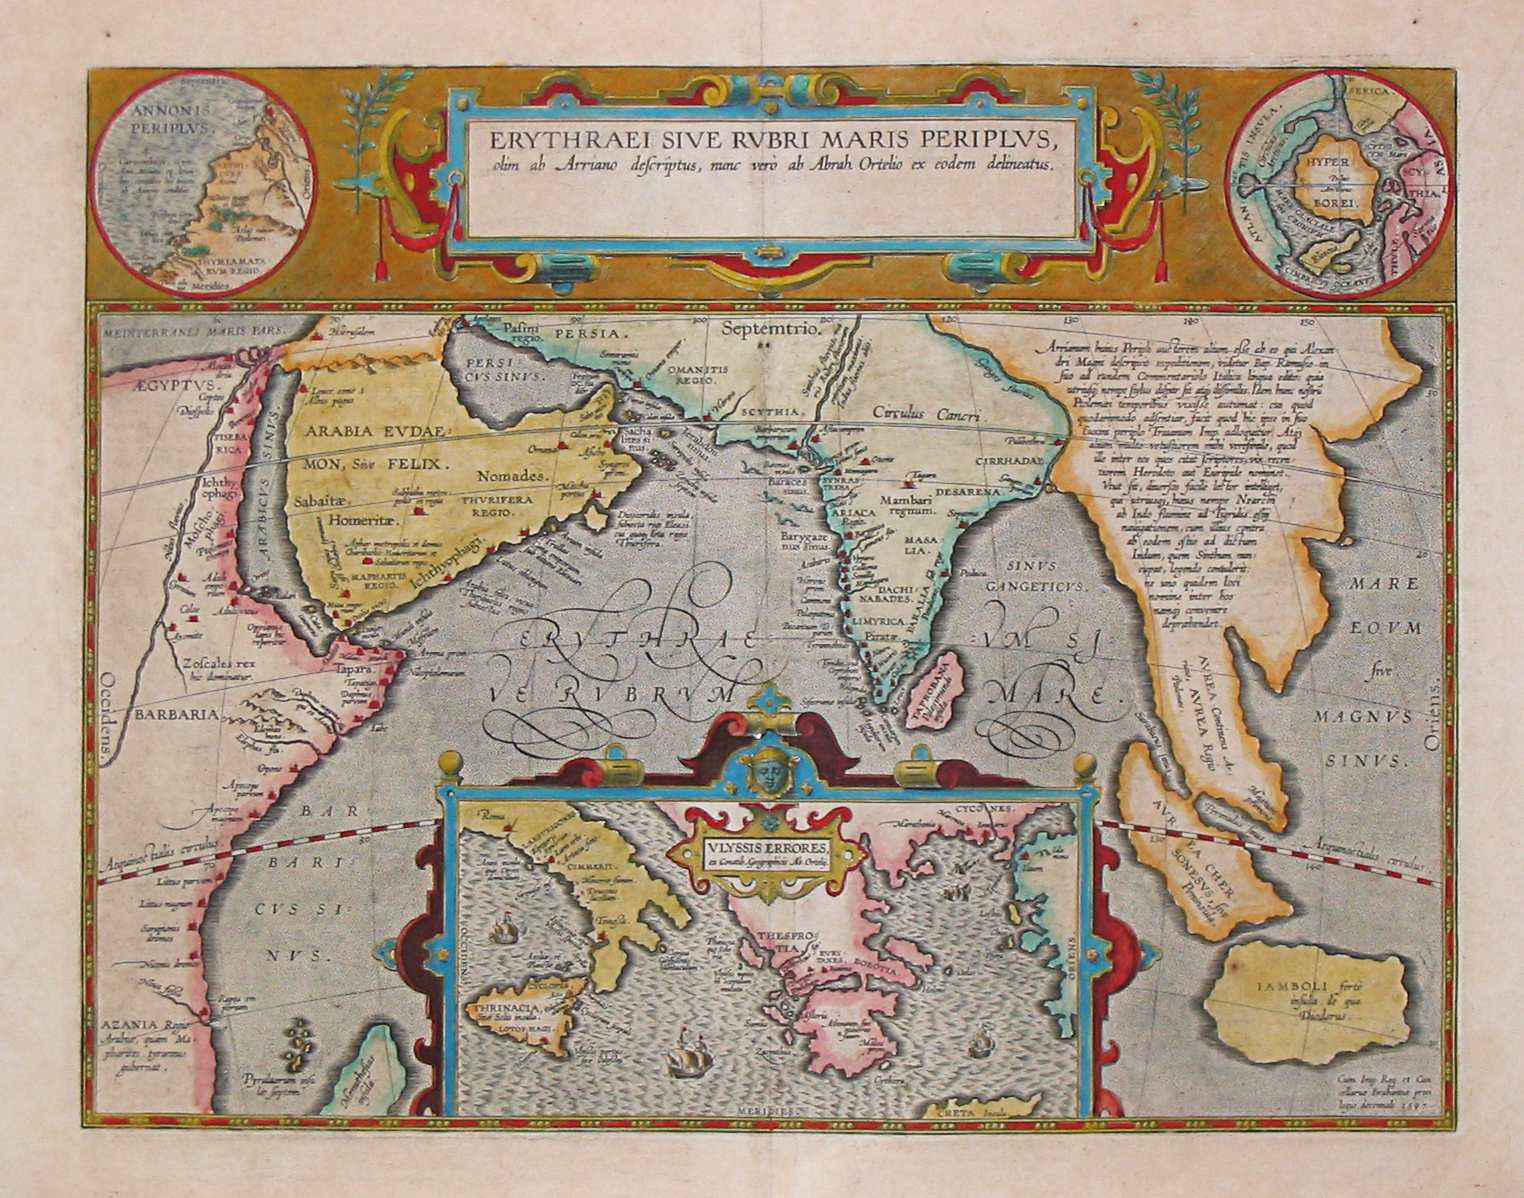 A 17th-century map depicting the locations of the Periplus of the Erythraean